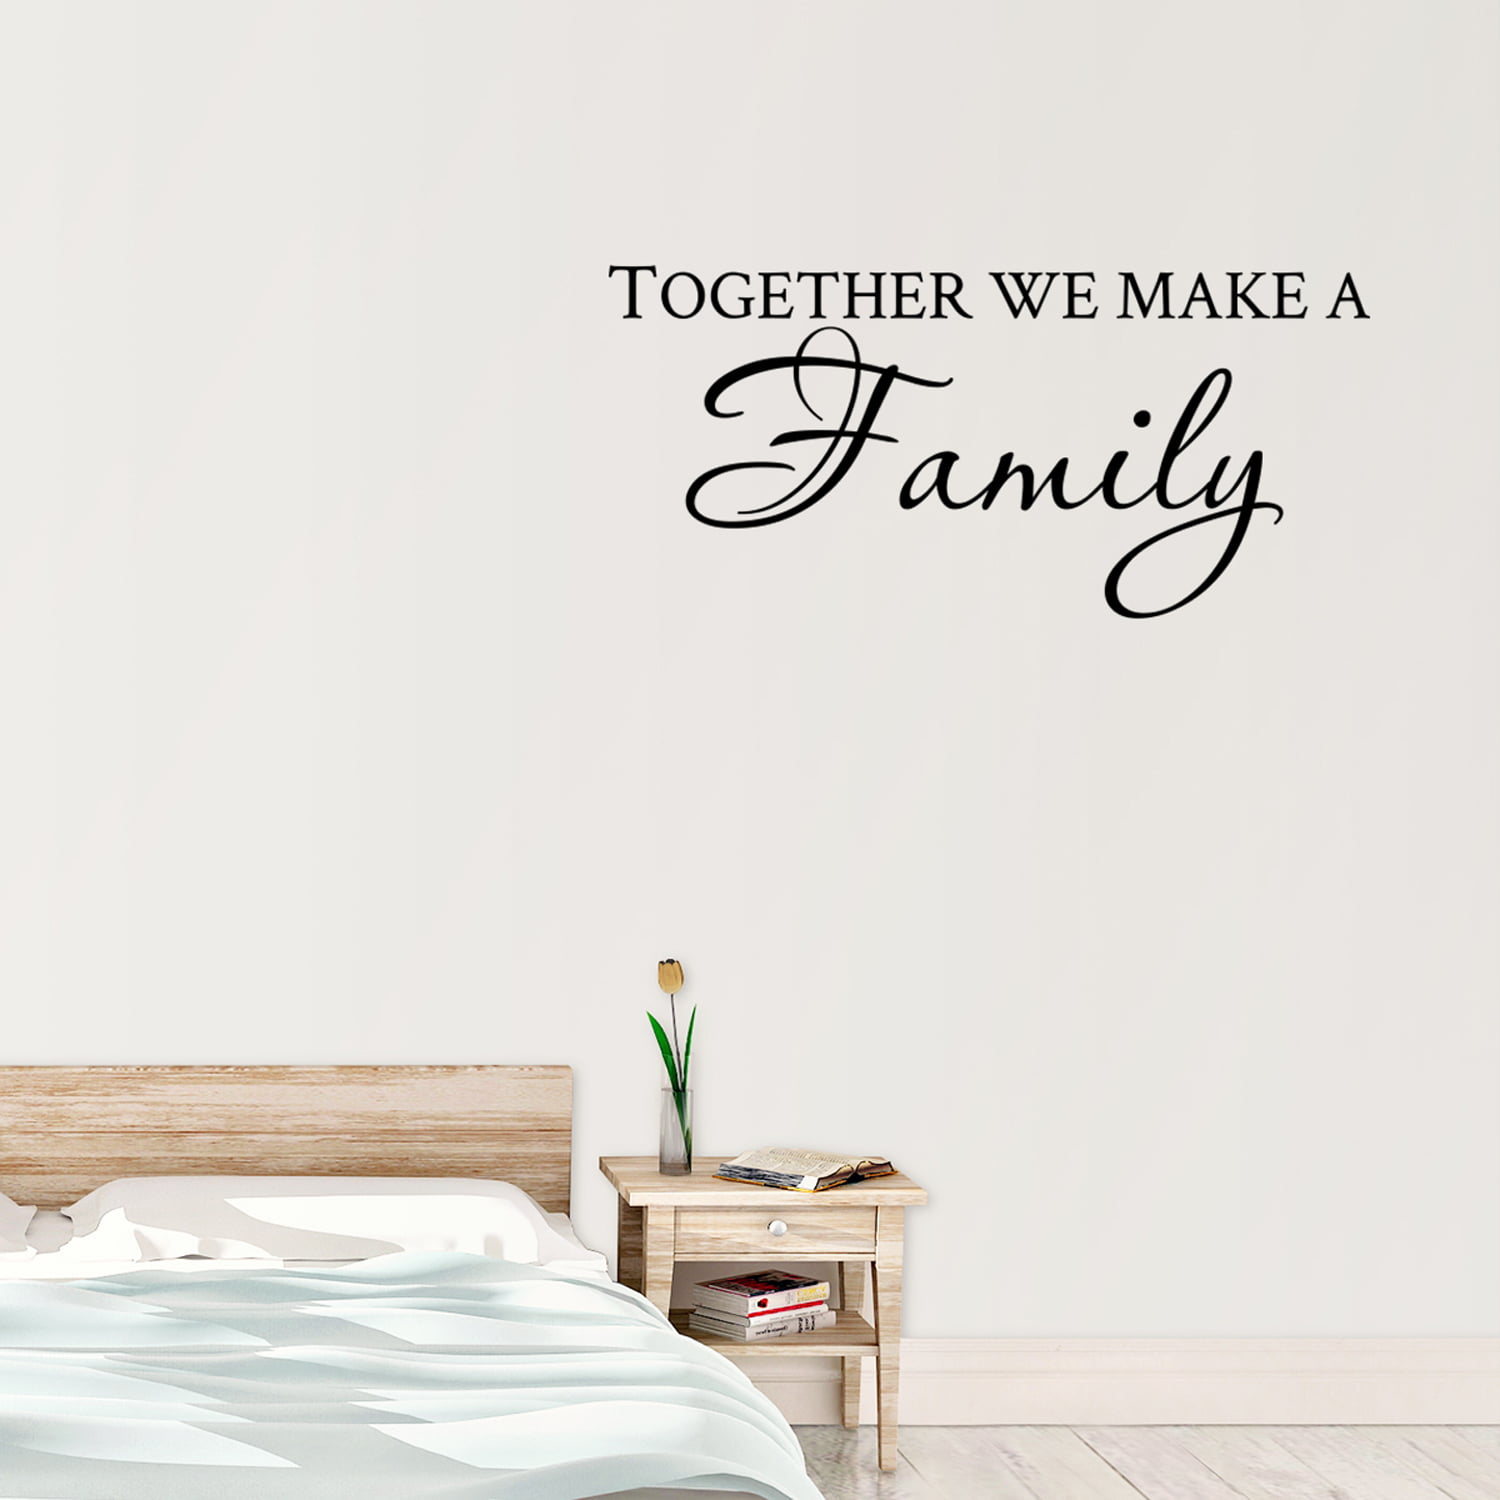 Together We Make a Family Wall Decal Quotes Wall Art Stickers Saying